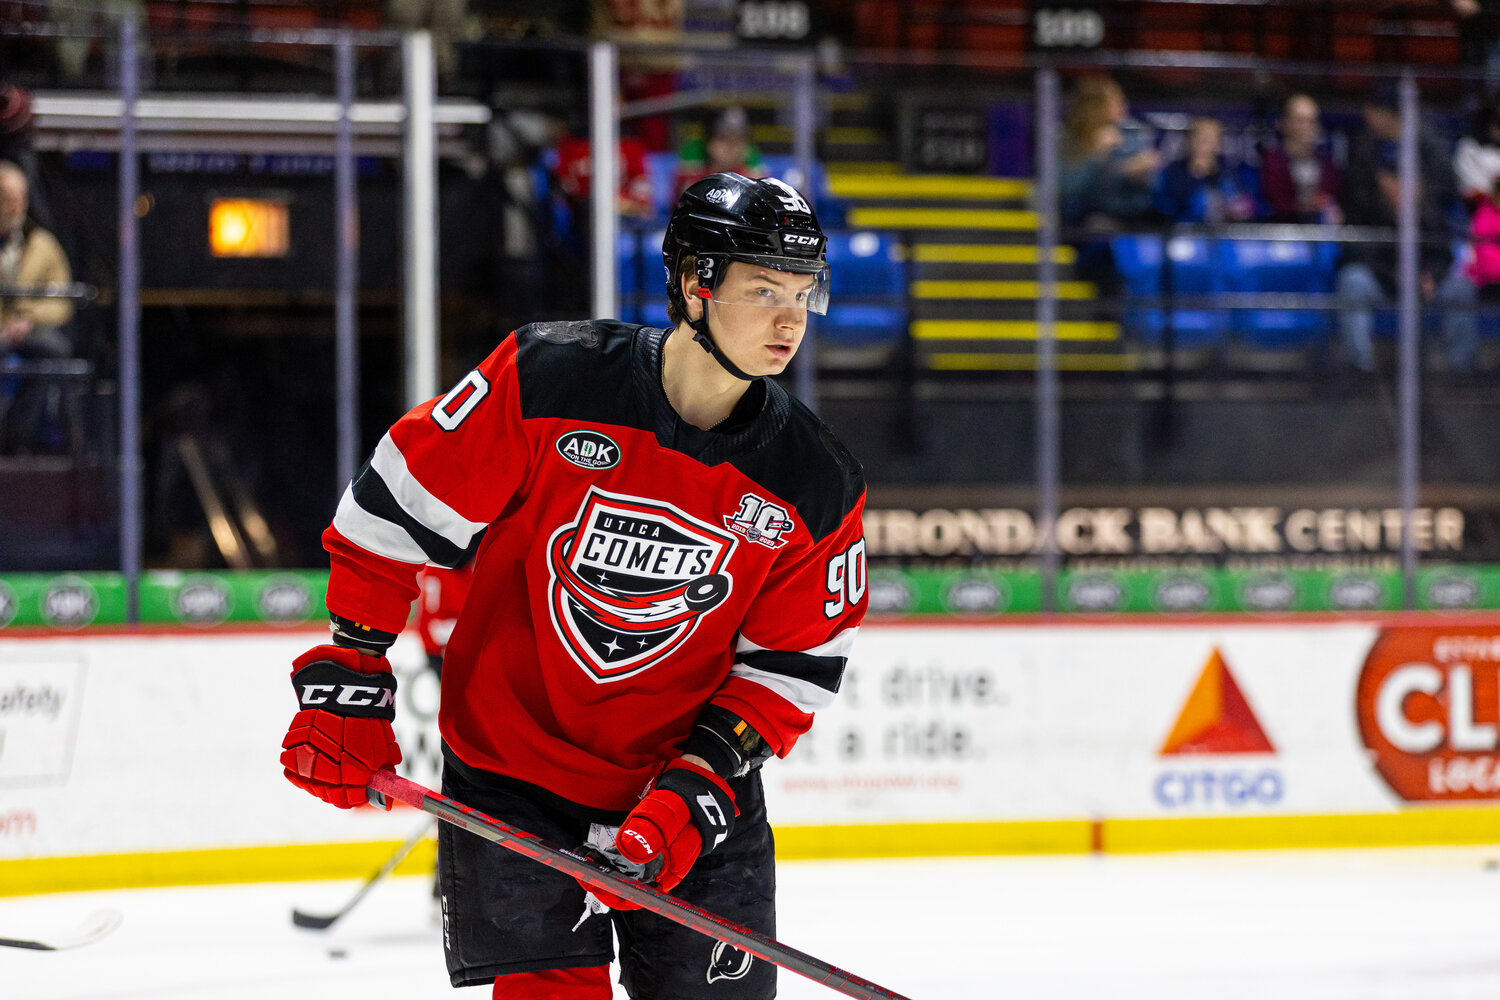 Timur Imbragimov joined the Utica Comets in March following a trade by the parent New Jersey Devils. He had six points in 15 games with Utica.